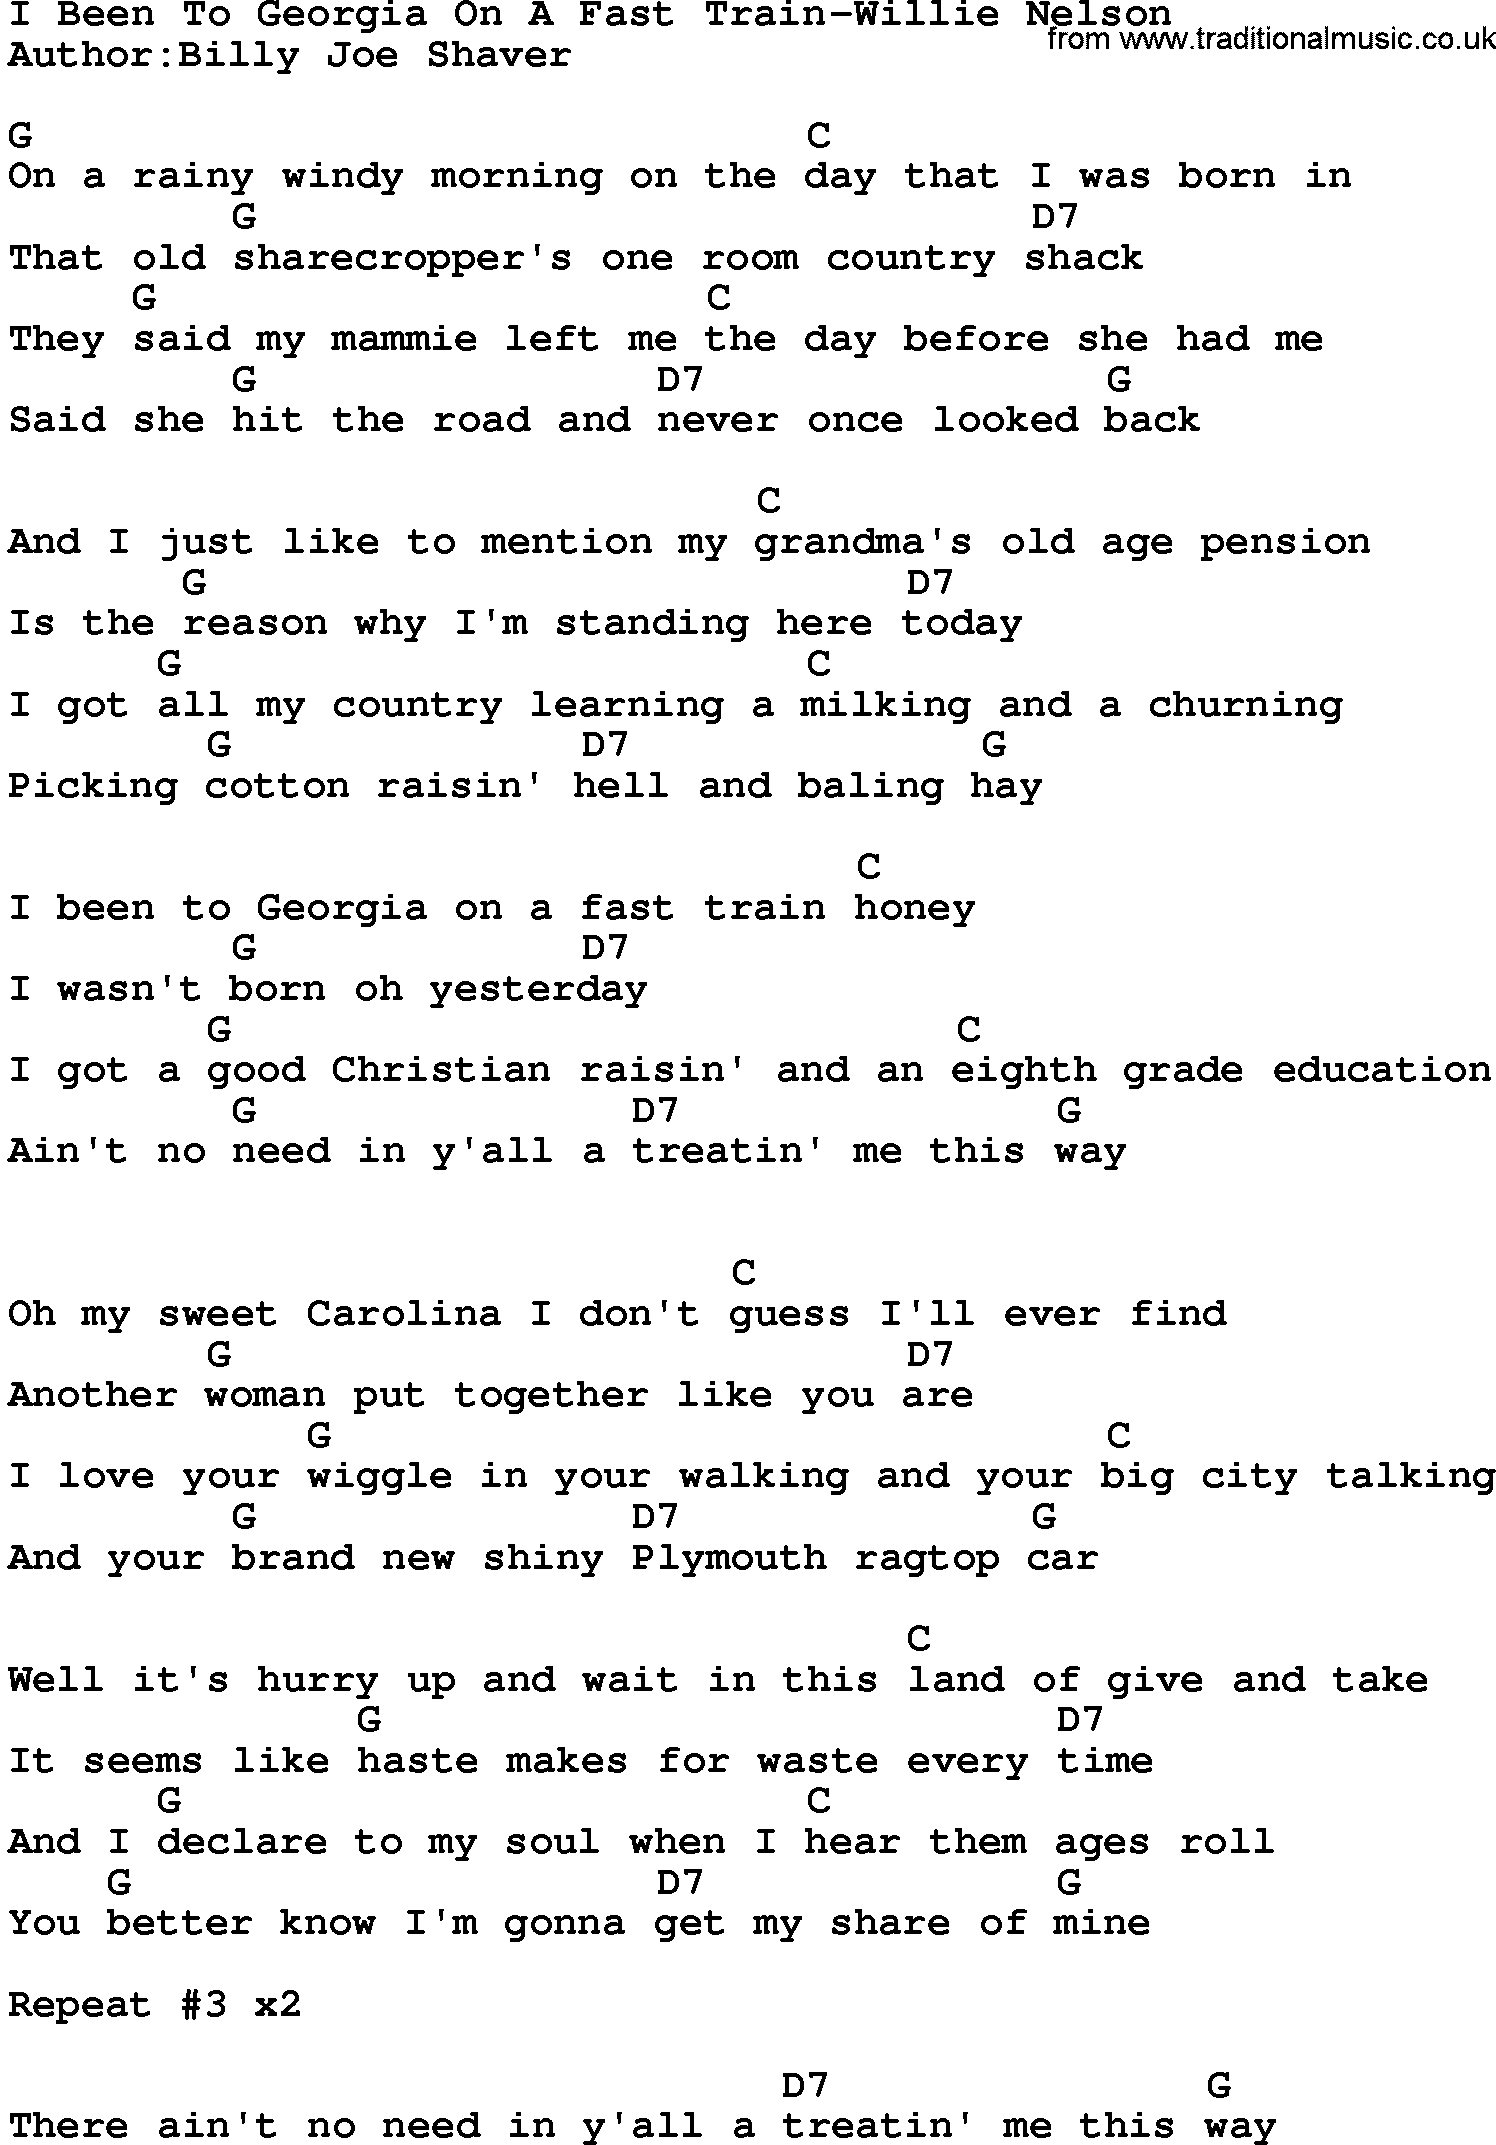 Fast Car Chords Country Musici Been To Georgia On A Fast Train Willie Nelson Lyrics